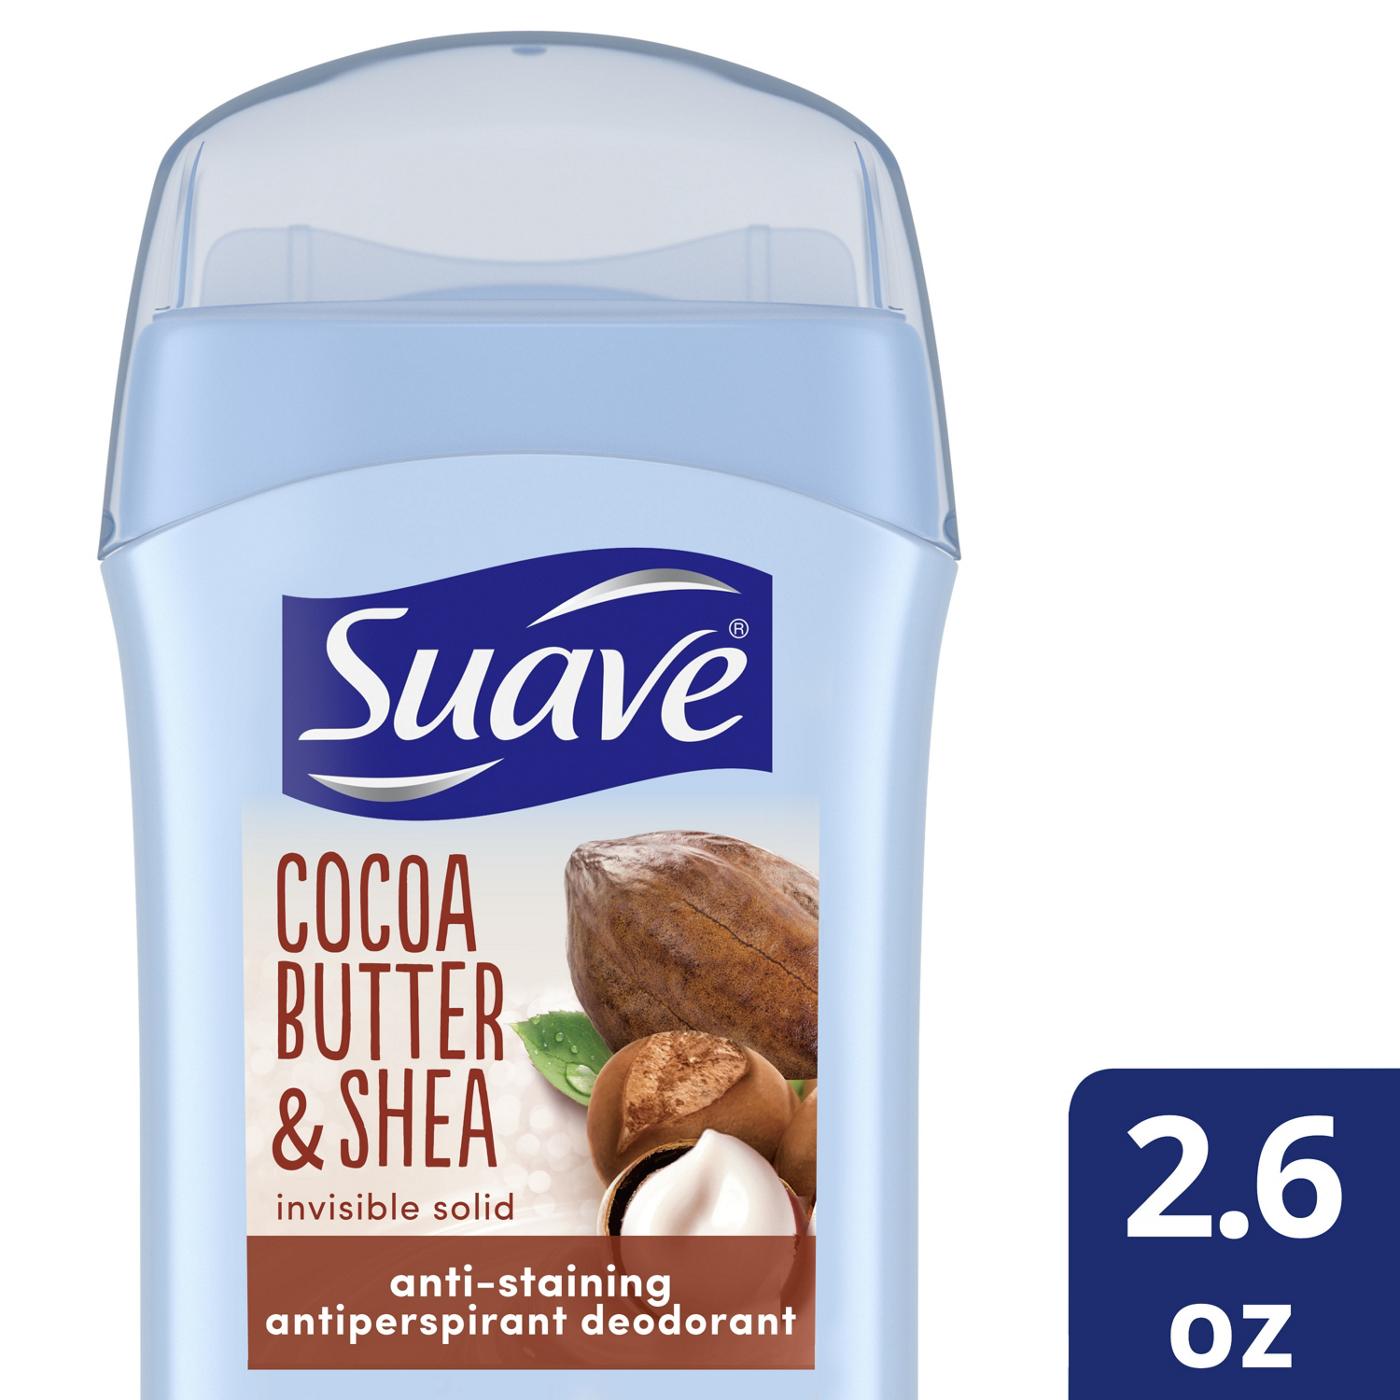 Suave Invisible Solid Antiperspirant Deodorant - Cocoa Butter & Shea; image 2 of 9